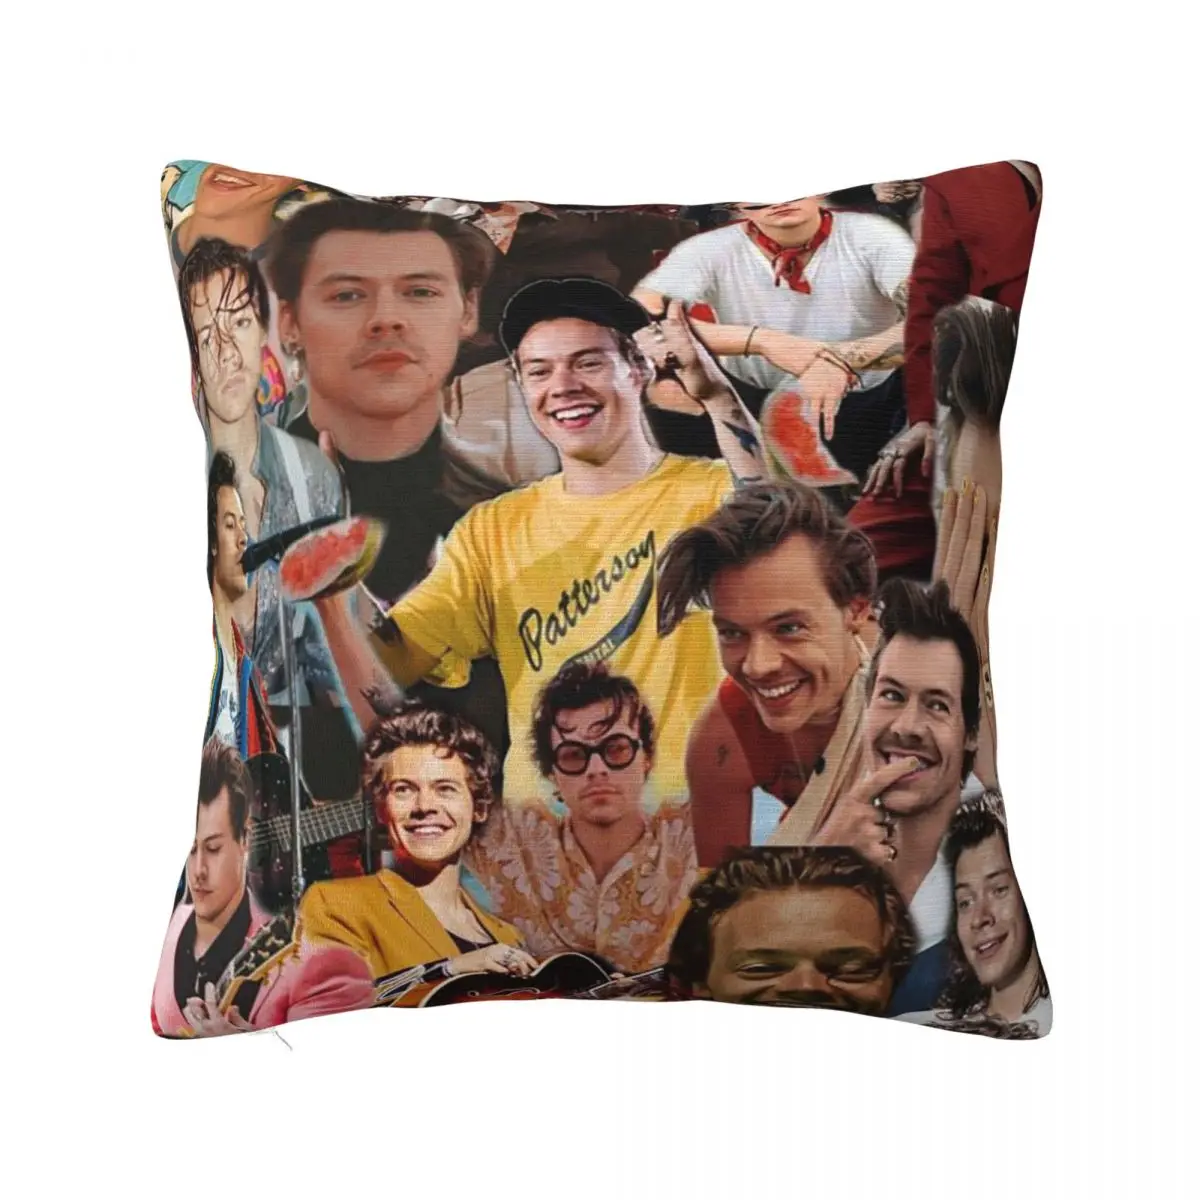 Harrys Pillowcase Printing Polyester Cushion Cover Decor Styles Throw Pillow Case Cover Bedroom Zipper 45*45cm